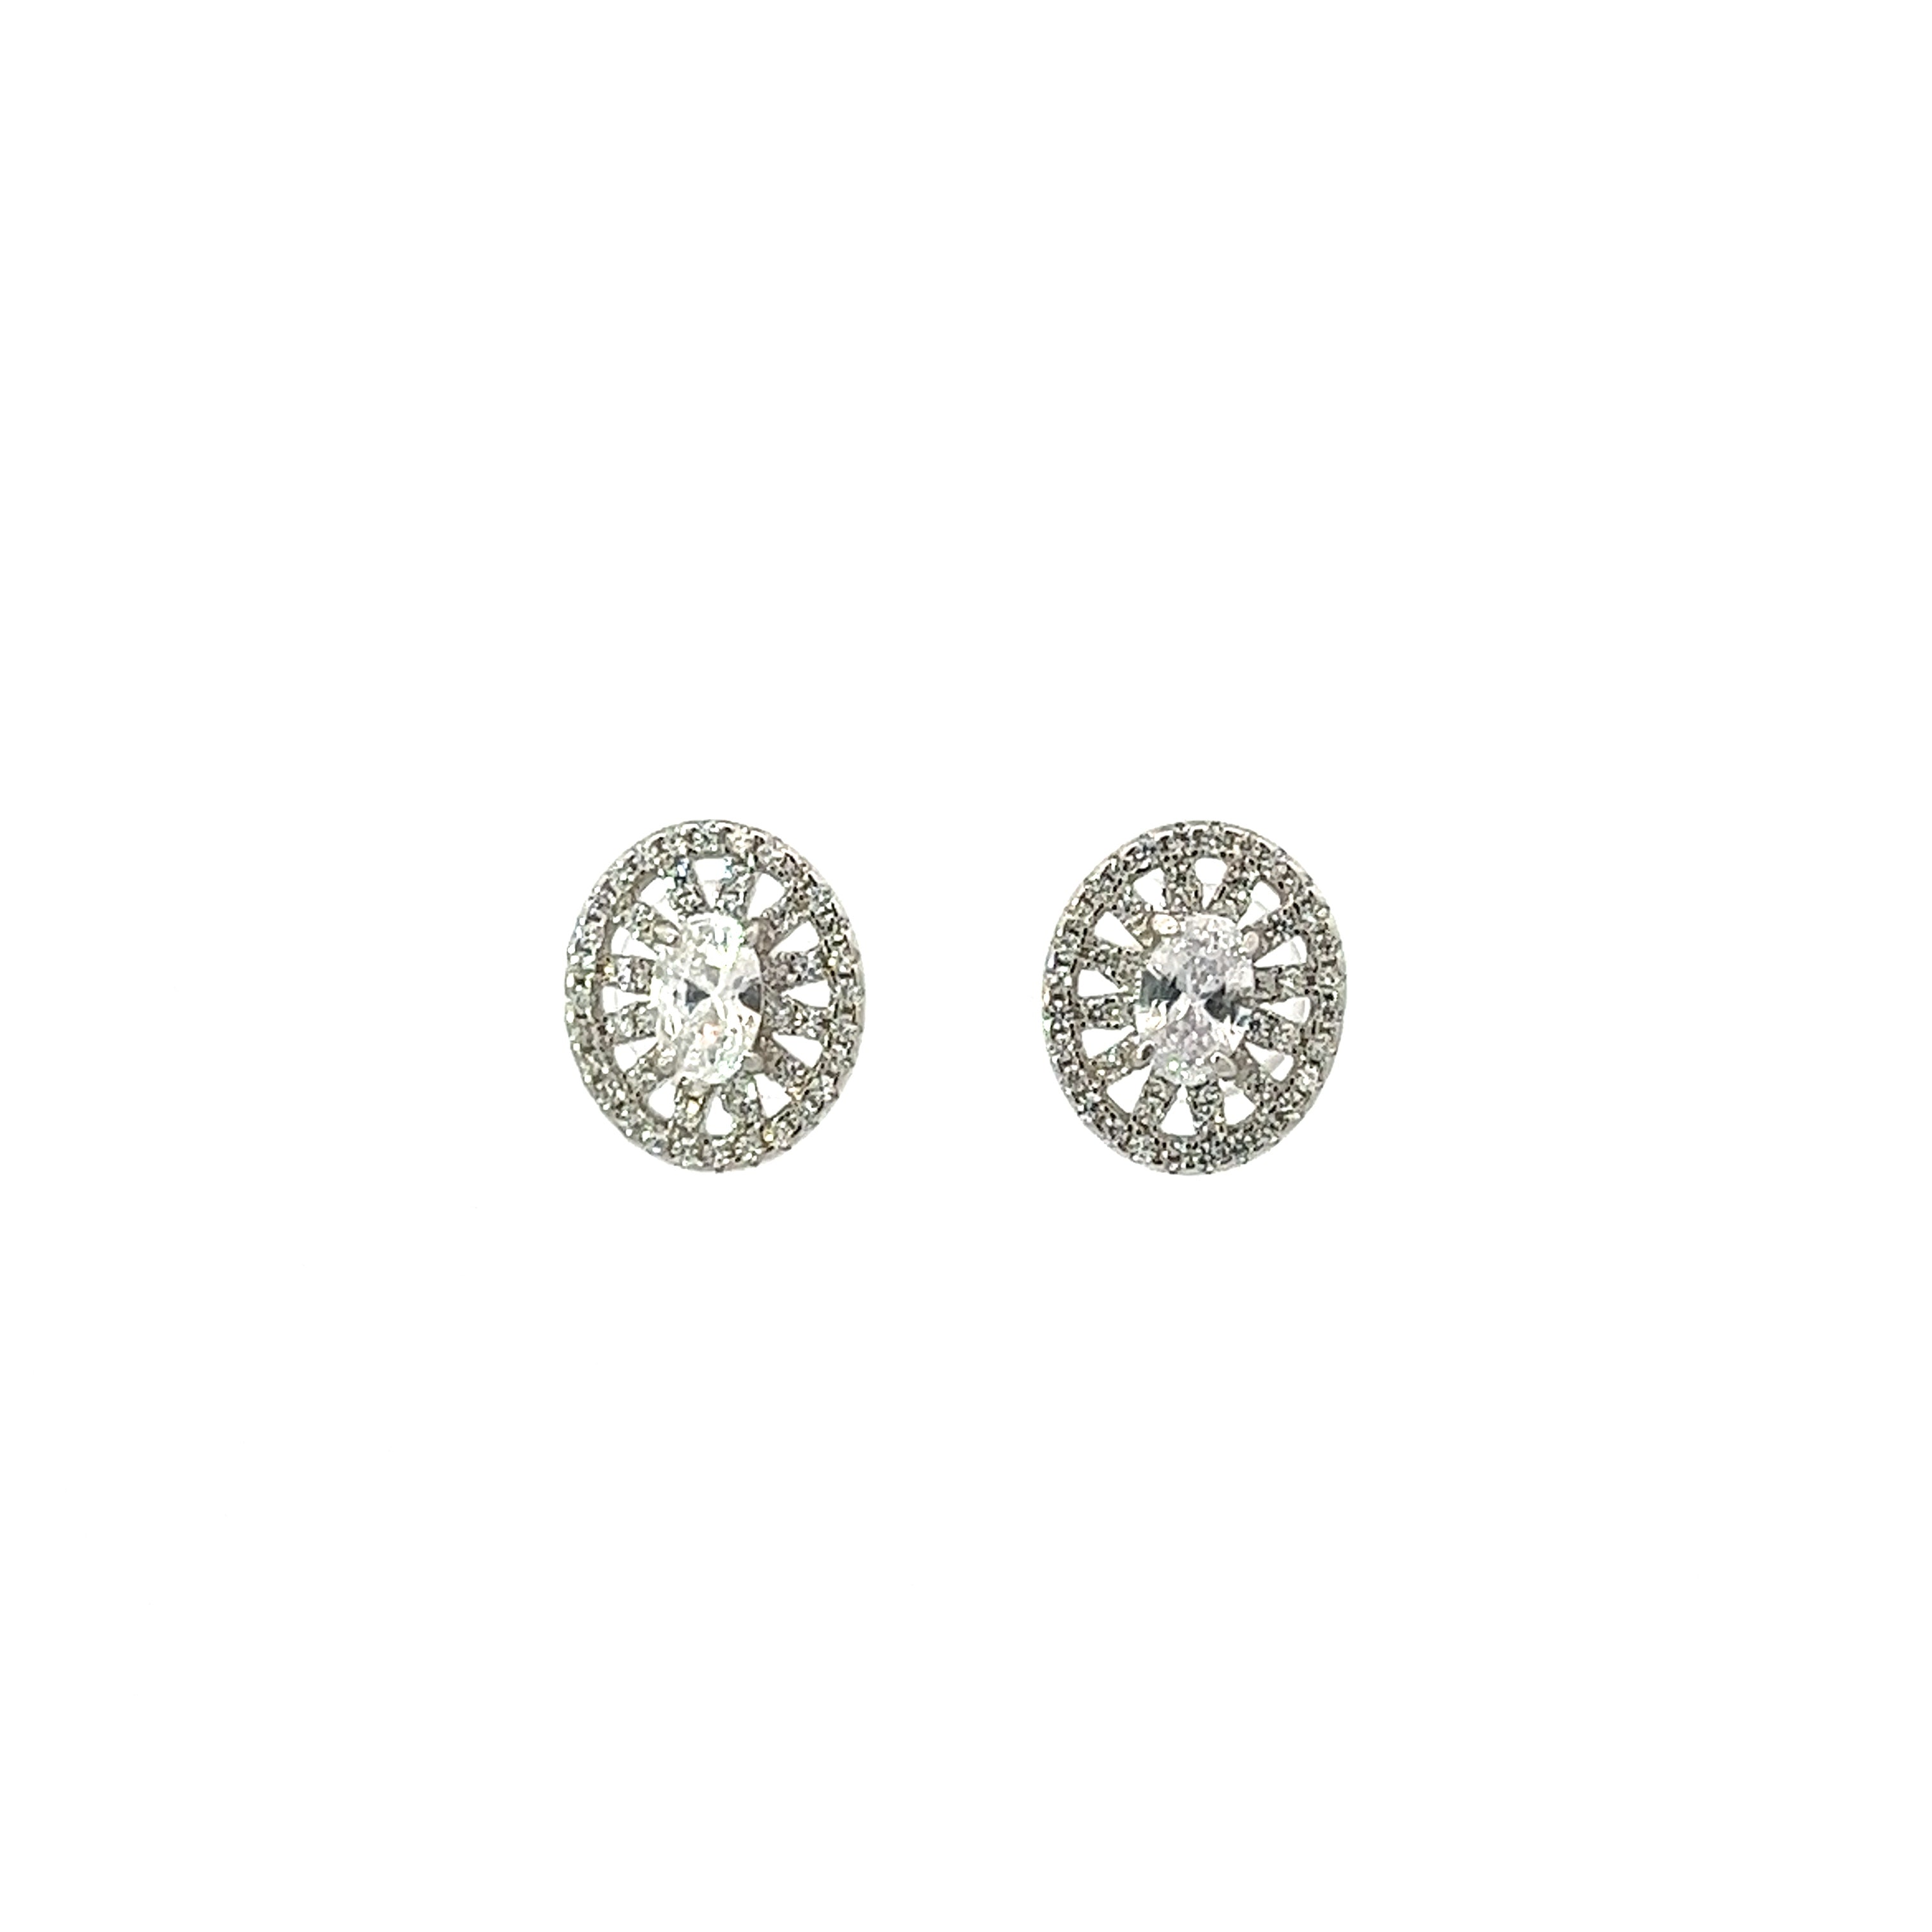 925 SILVER STUD EARRINGS WITH CRYSTALS